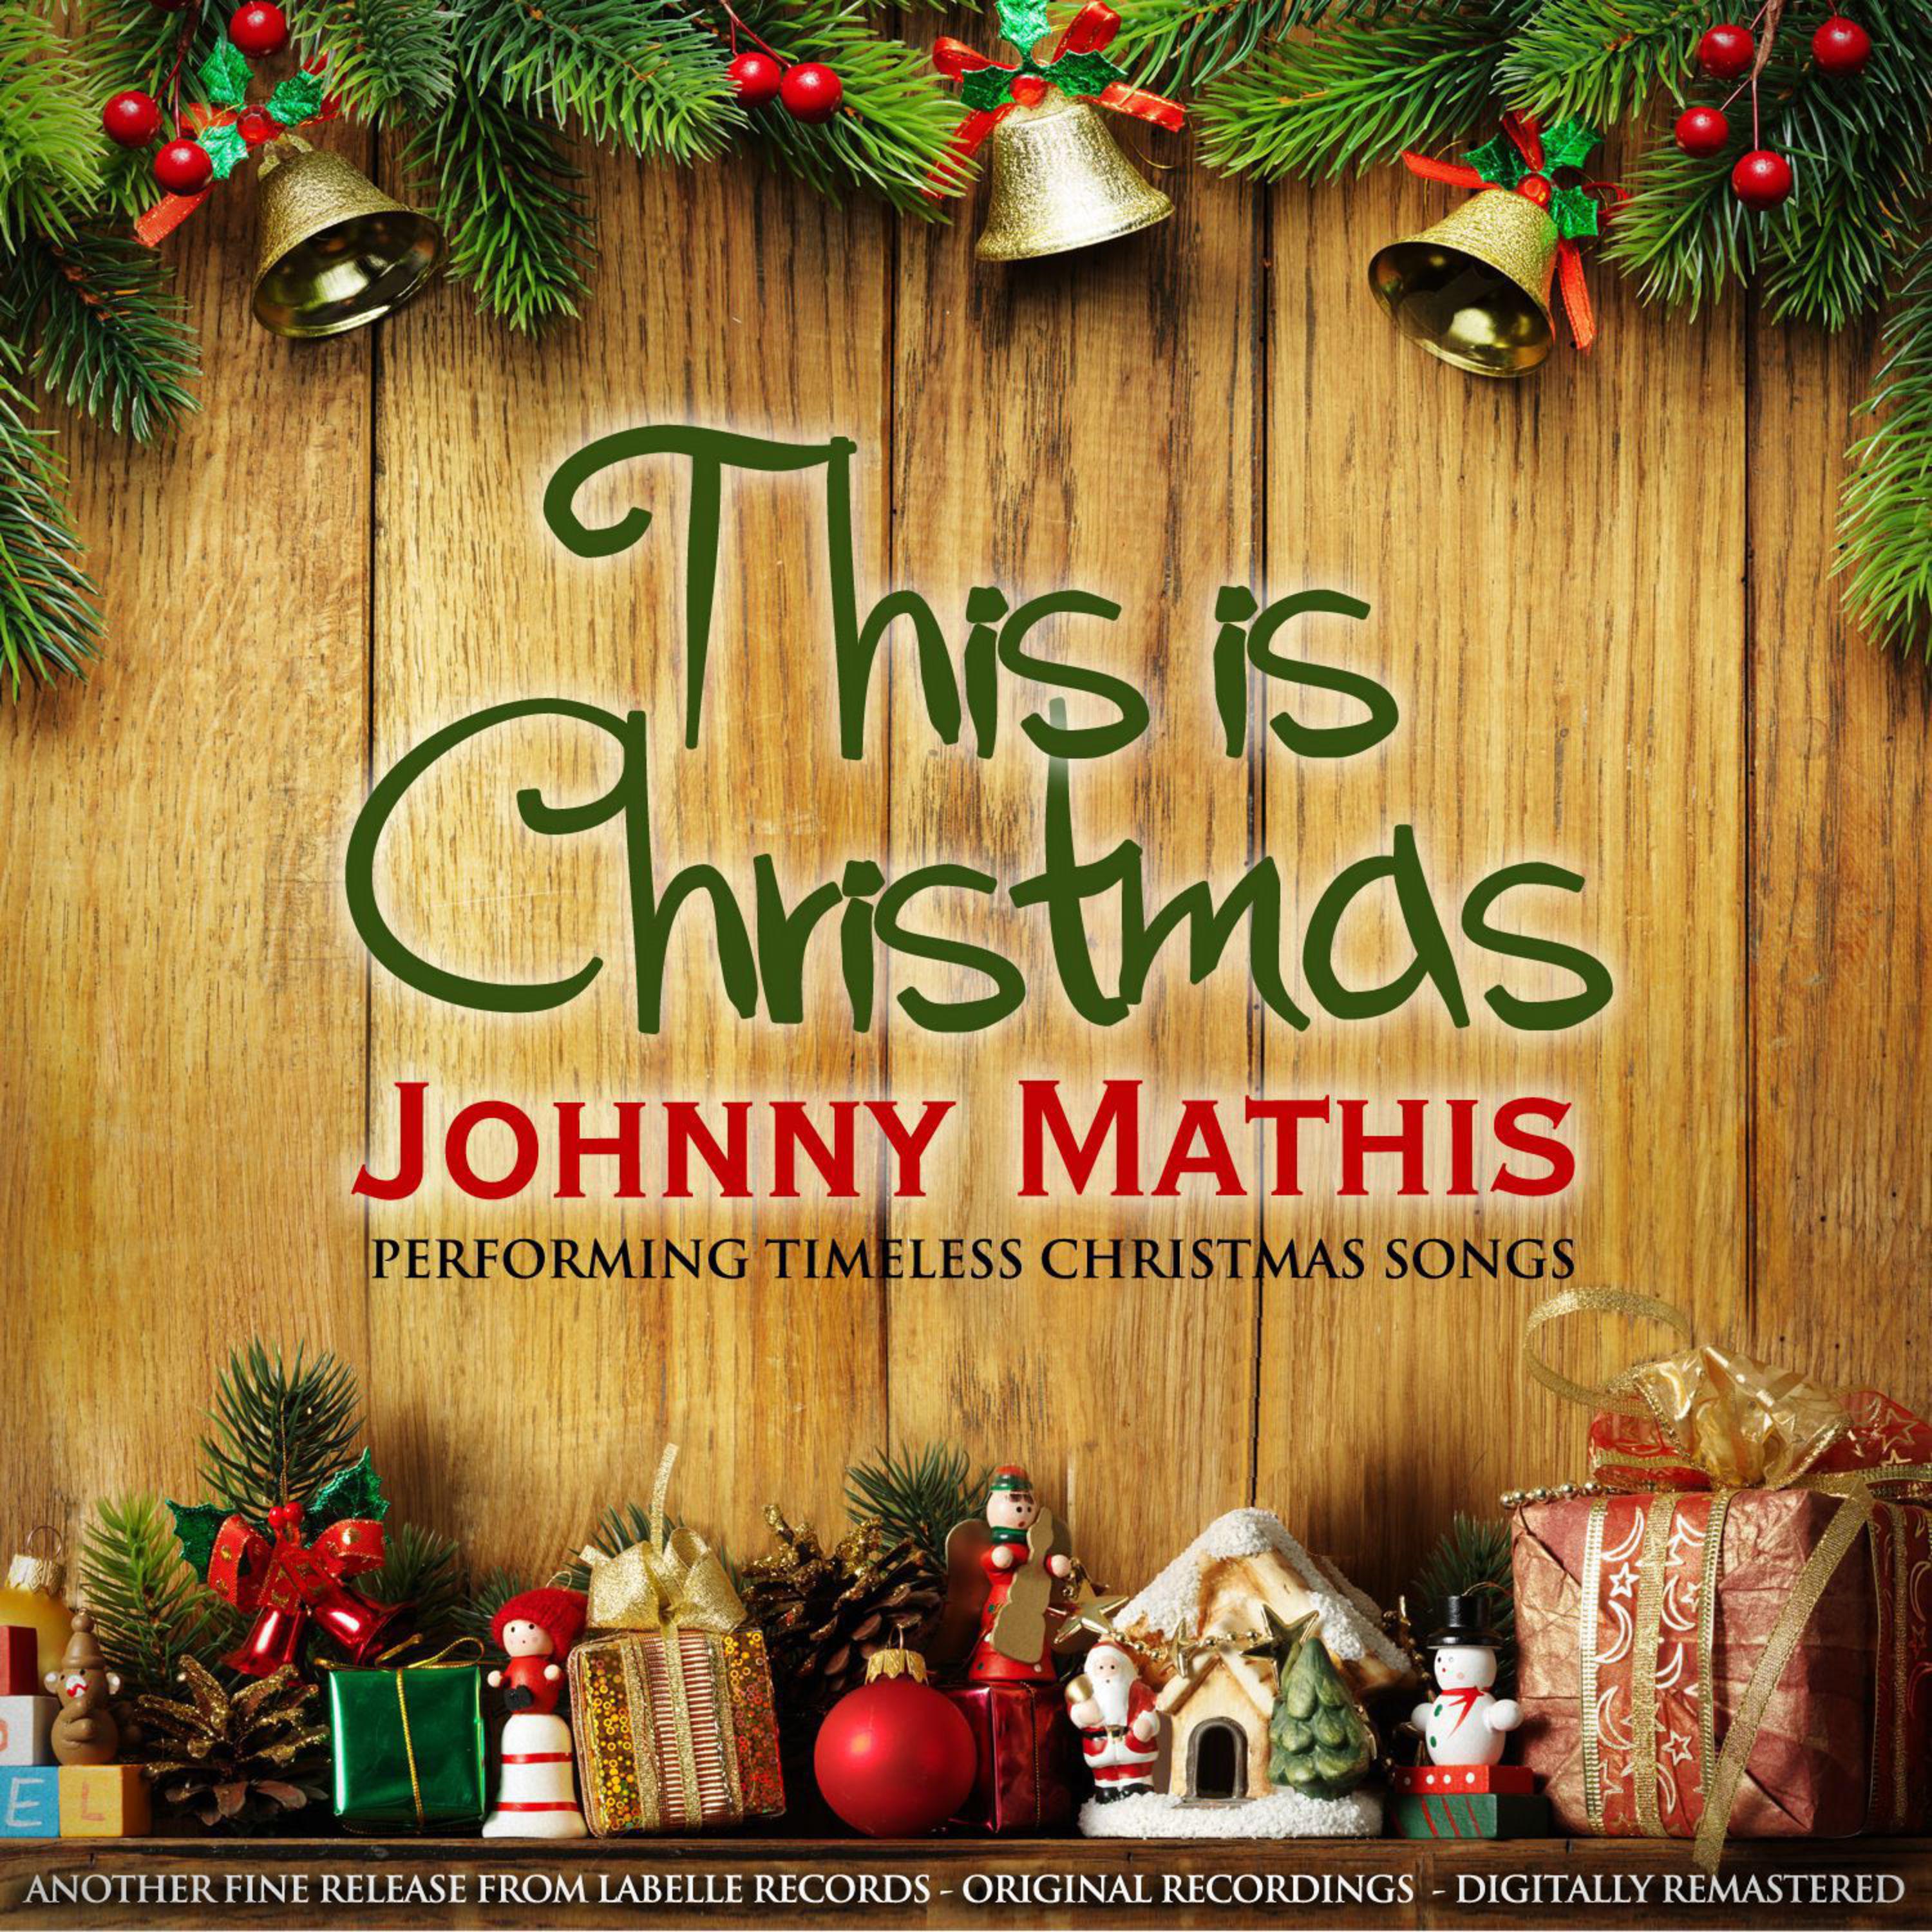 This is Christmas - Johnny Mathis Performing Timeless Christmas Songs (Remastered)